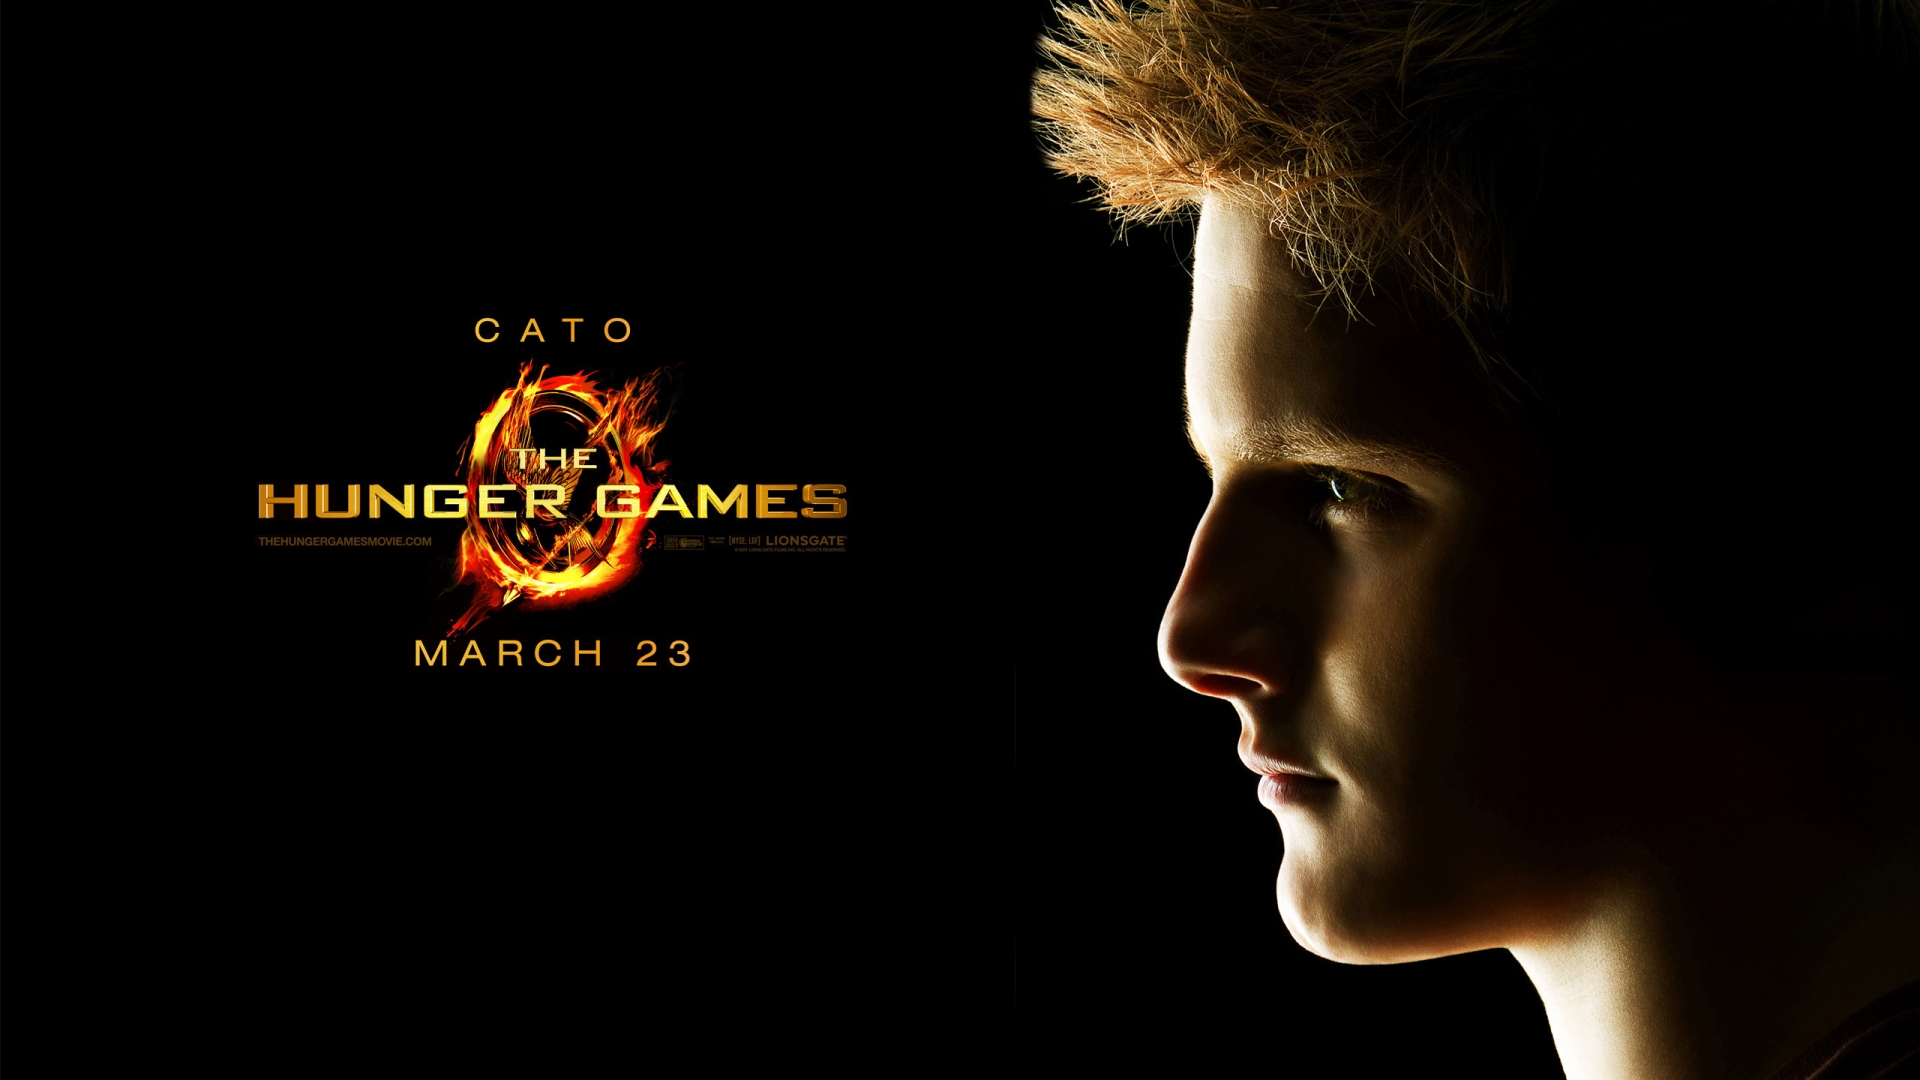 The Hunger Games Cato for 1920 x 1080 HDTV 1080p resolution